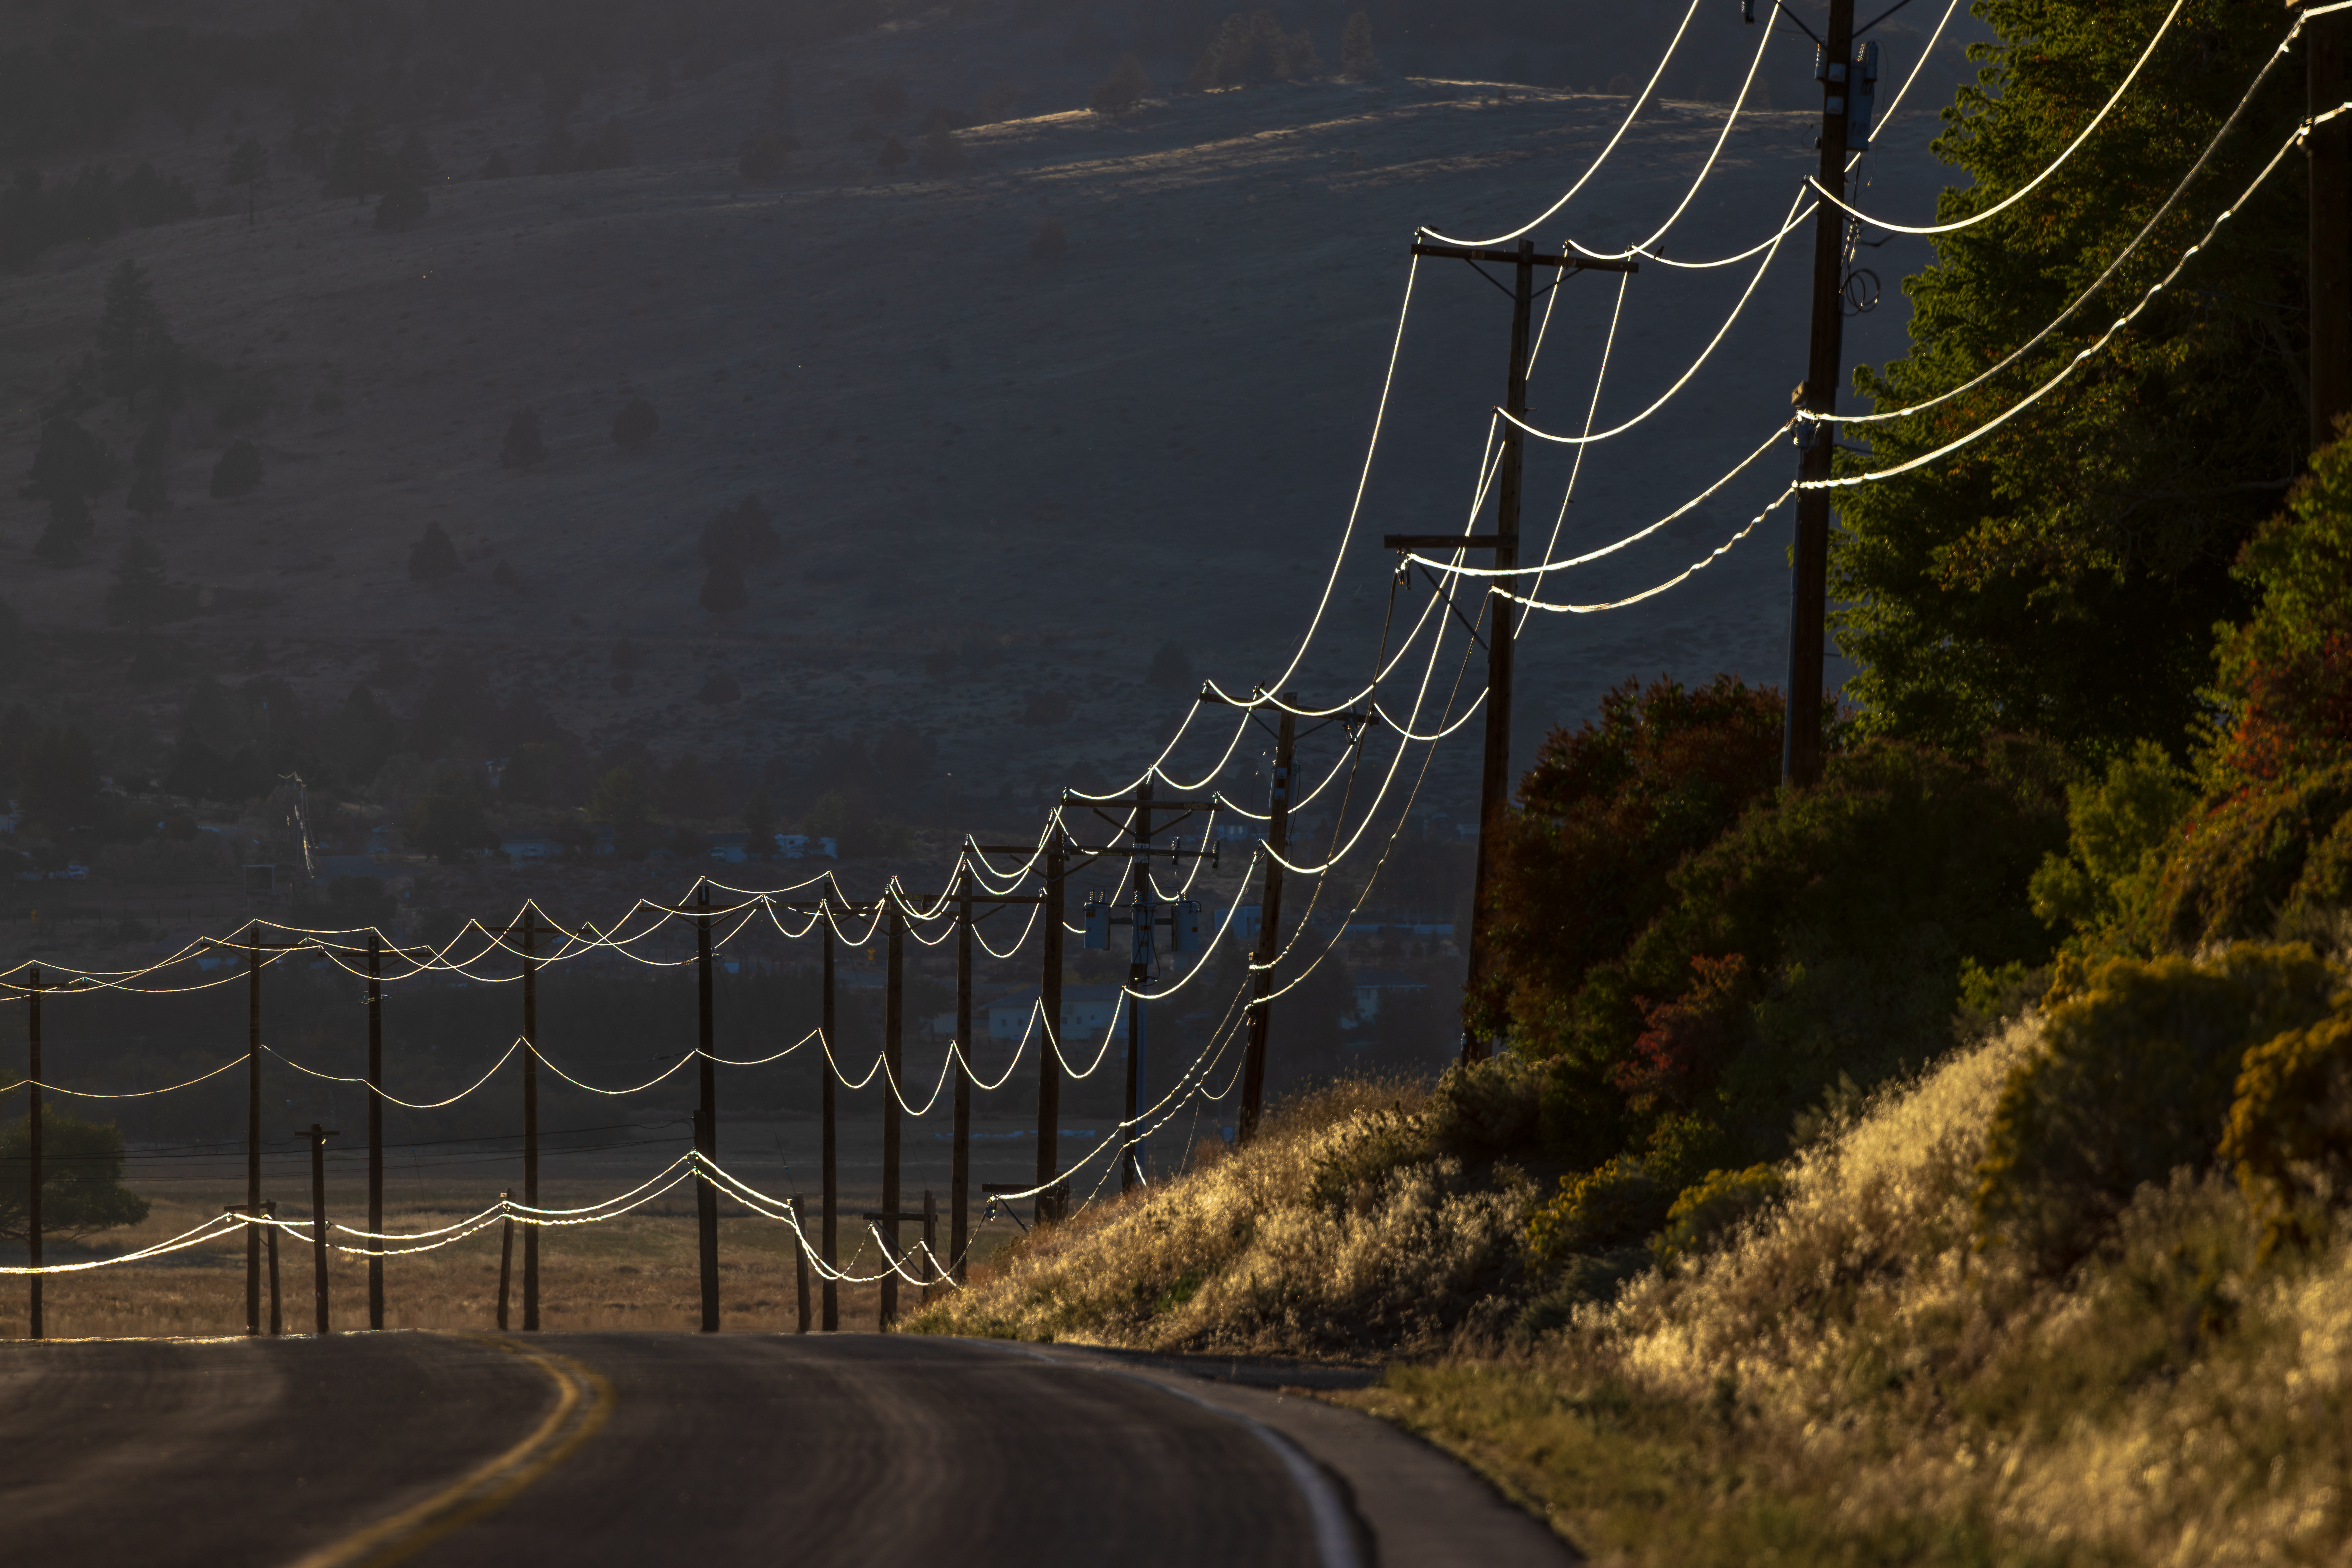 SUSANVILLE, CA - SEPTEMBER 27: Powers lines shine in sun light along Richmond Road on Wednesday, Sept. 27, 2023 in Susanville, CA. (Irfan Khan / Los Angeles Times)